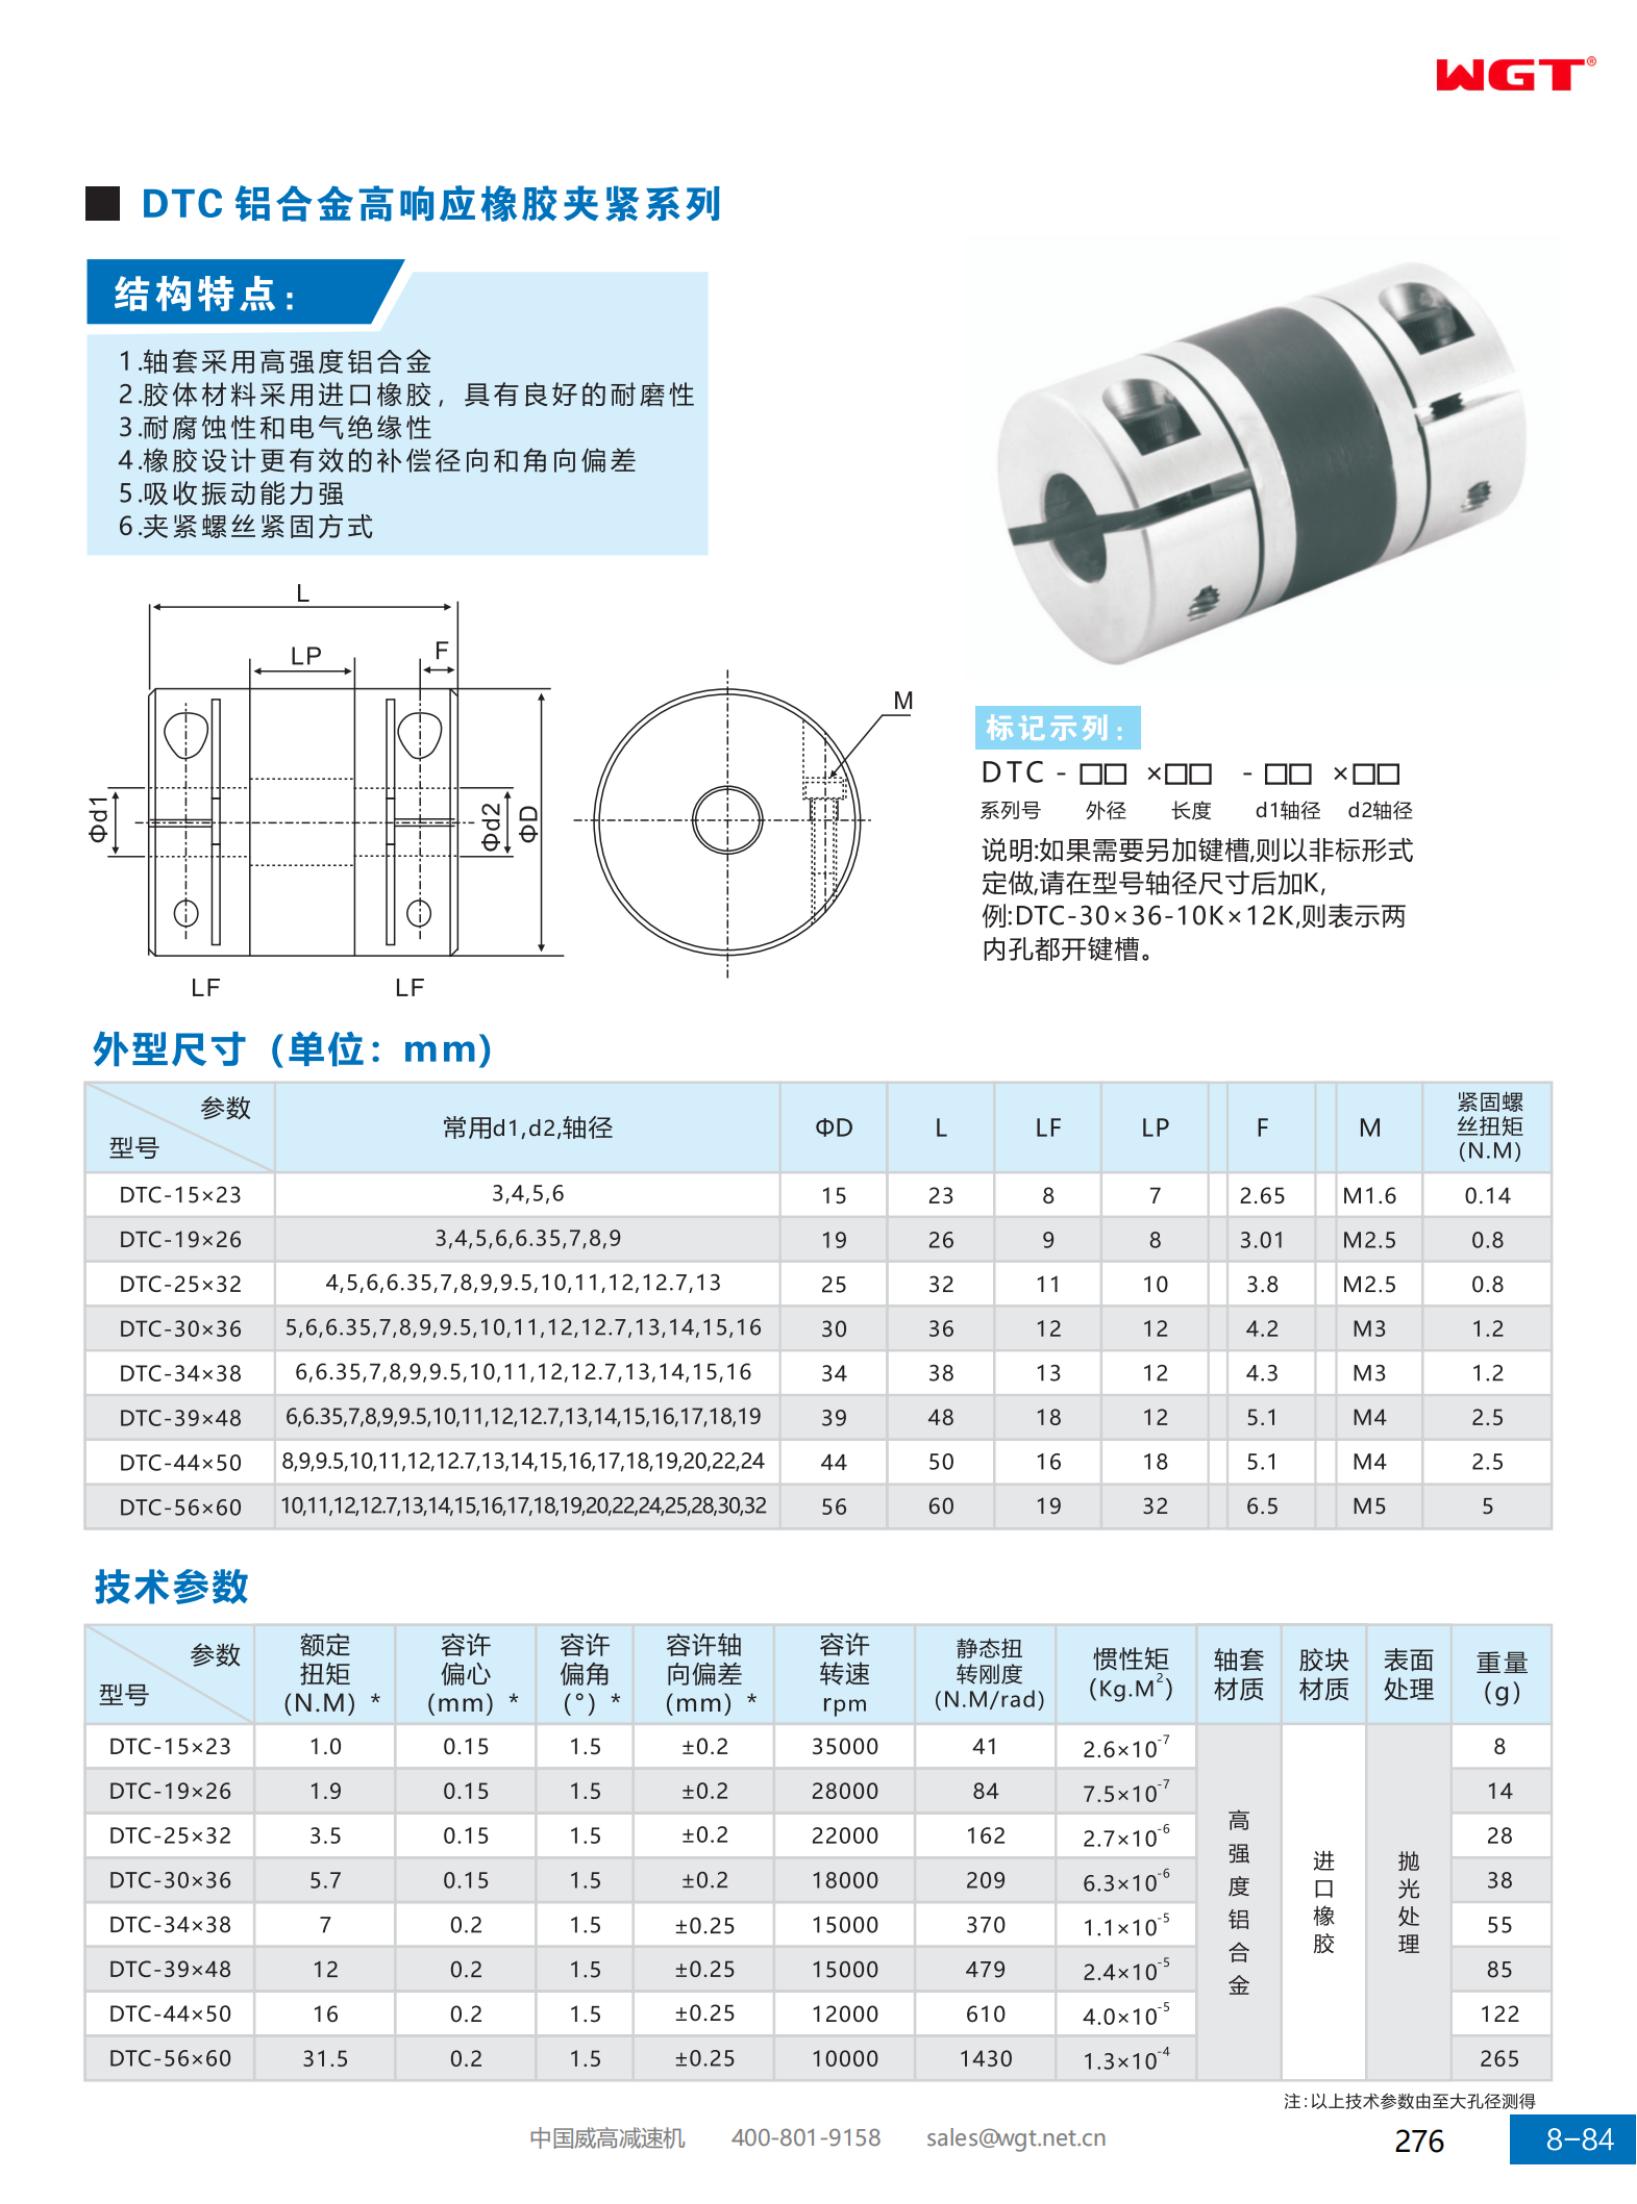 DTC Aluminum Alloy High Response Rubber Clamping Series